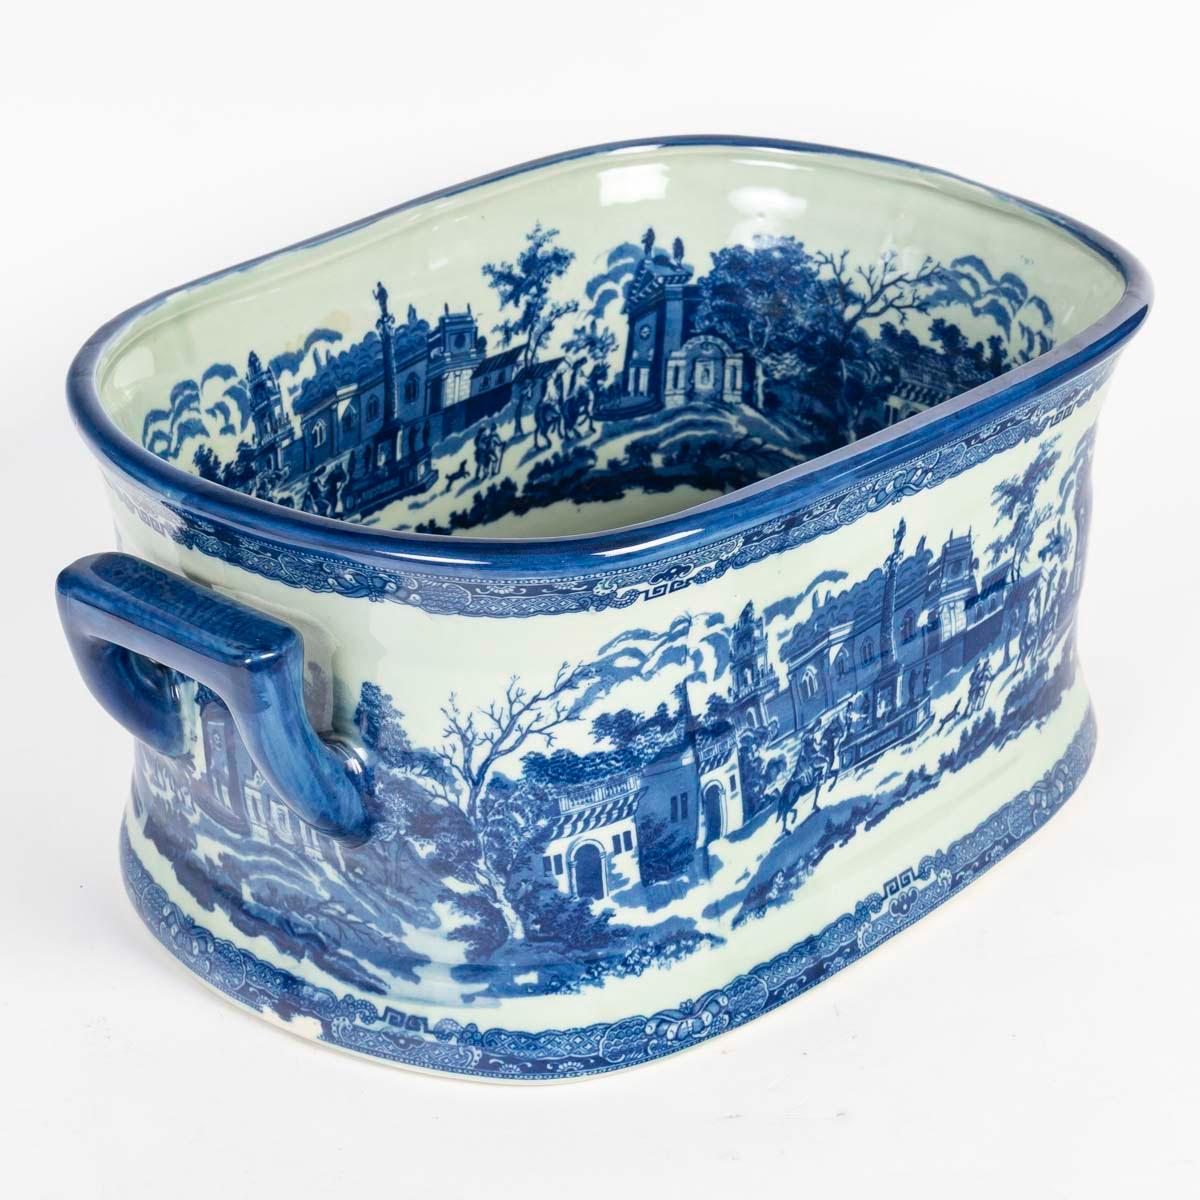 Blue earthenware planter, signed Victoria Ware, 20th century.

Victoria Ware blue earthenware planter, decorated with monuments and city scenes, early 20th century.
H: 21cm, W: 48cm, D: 29.5cm